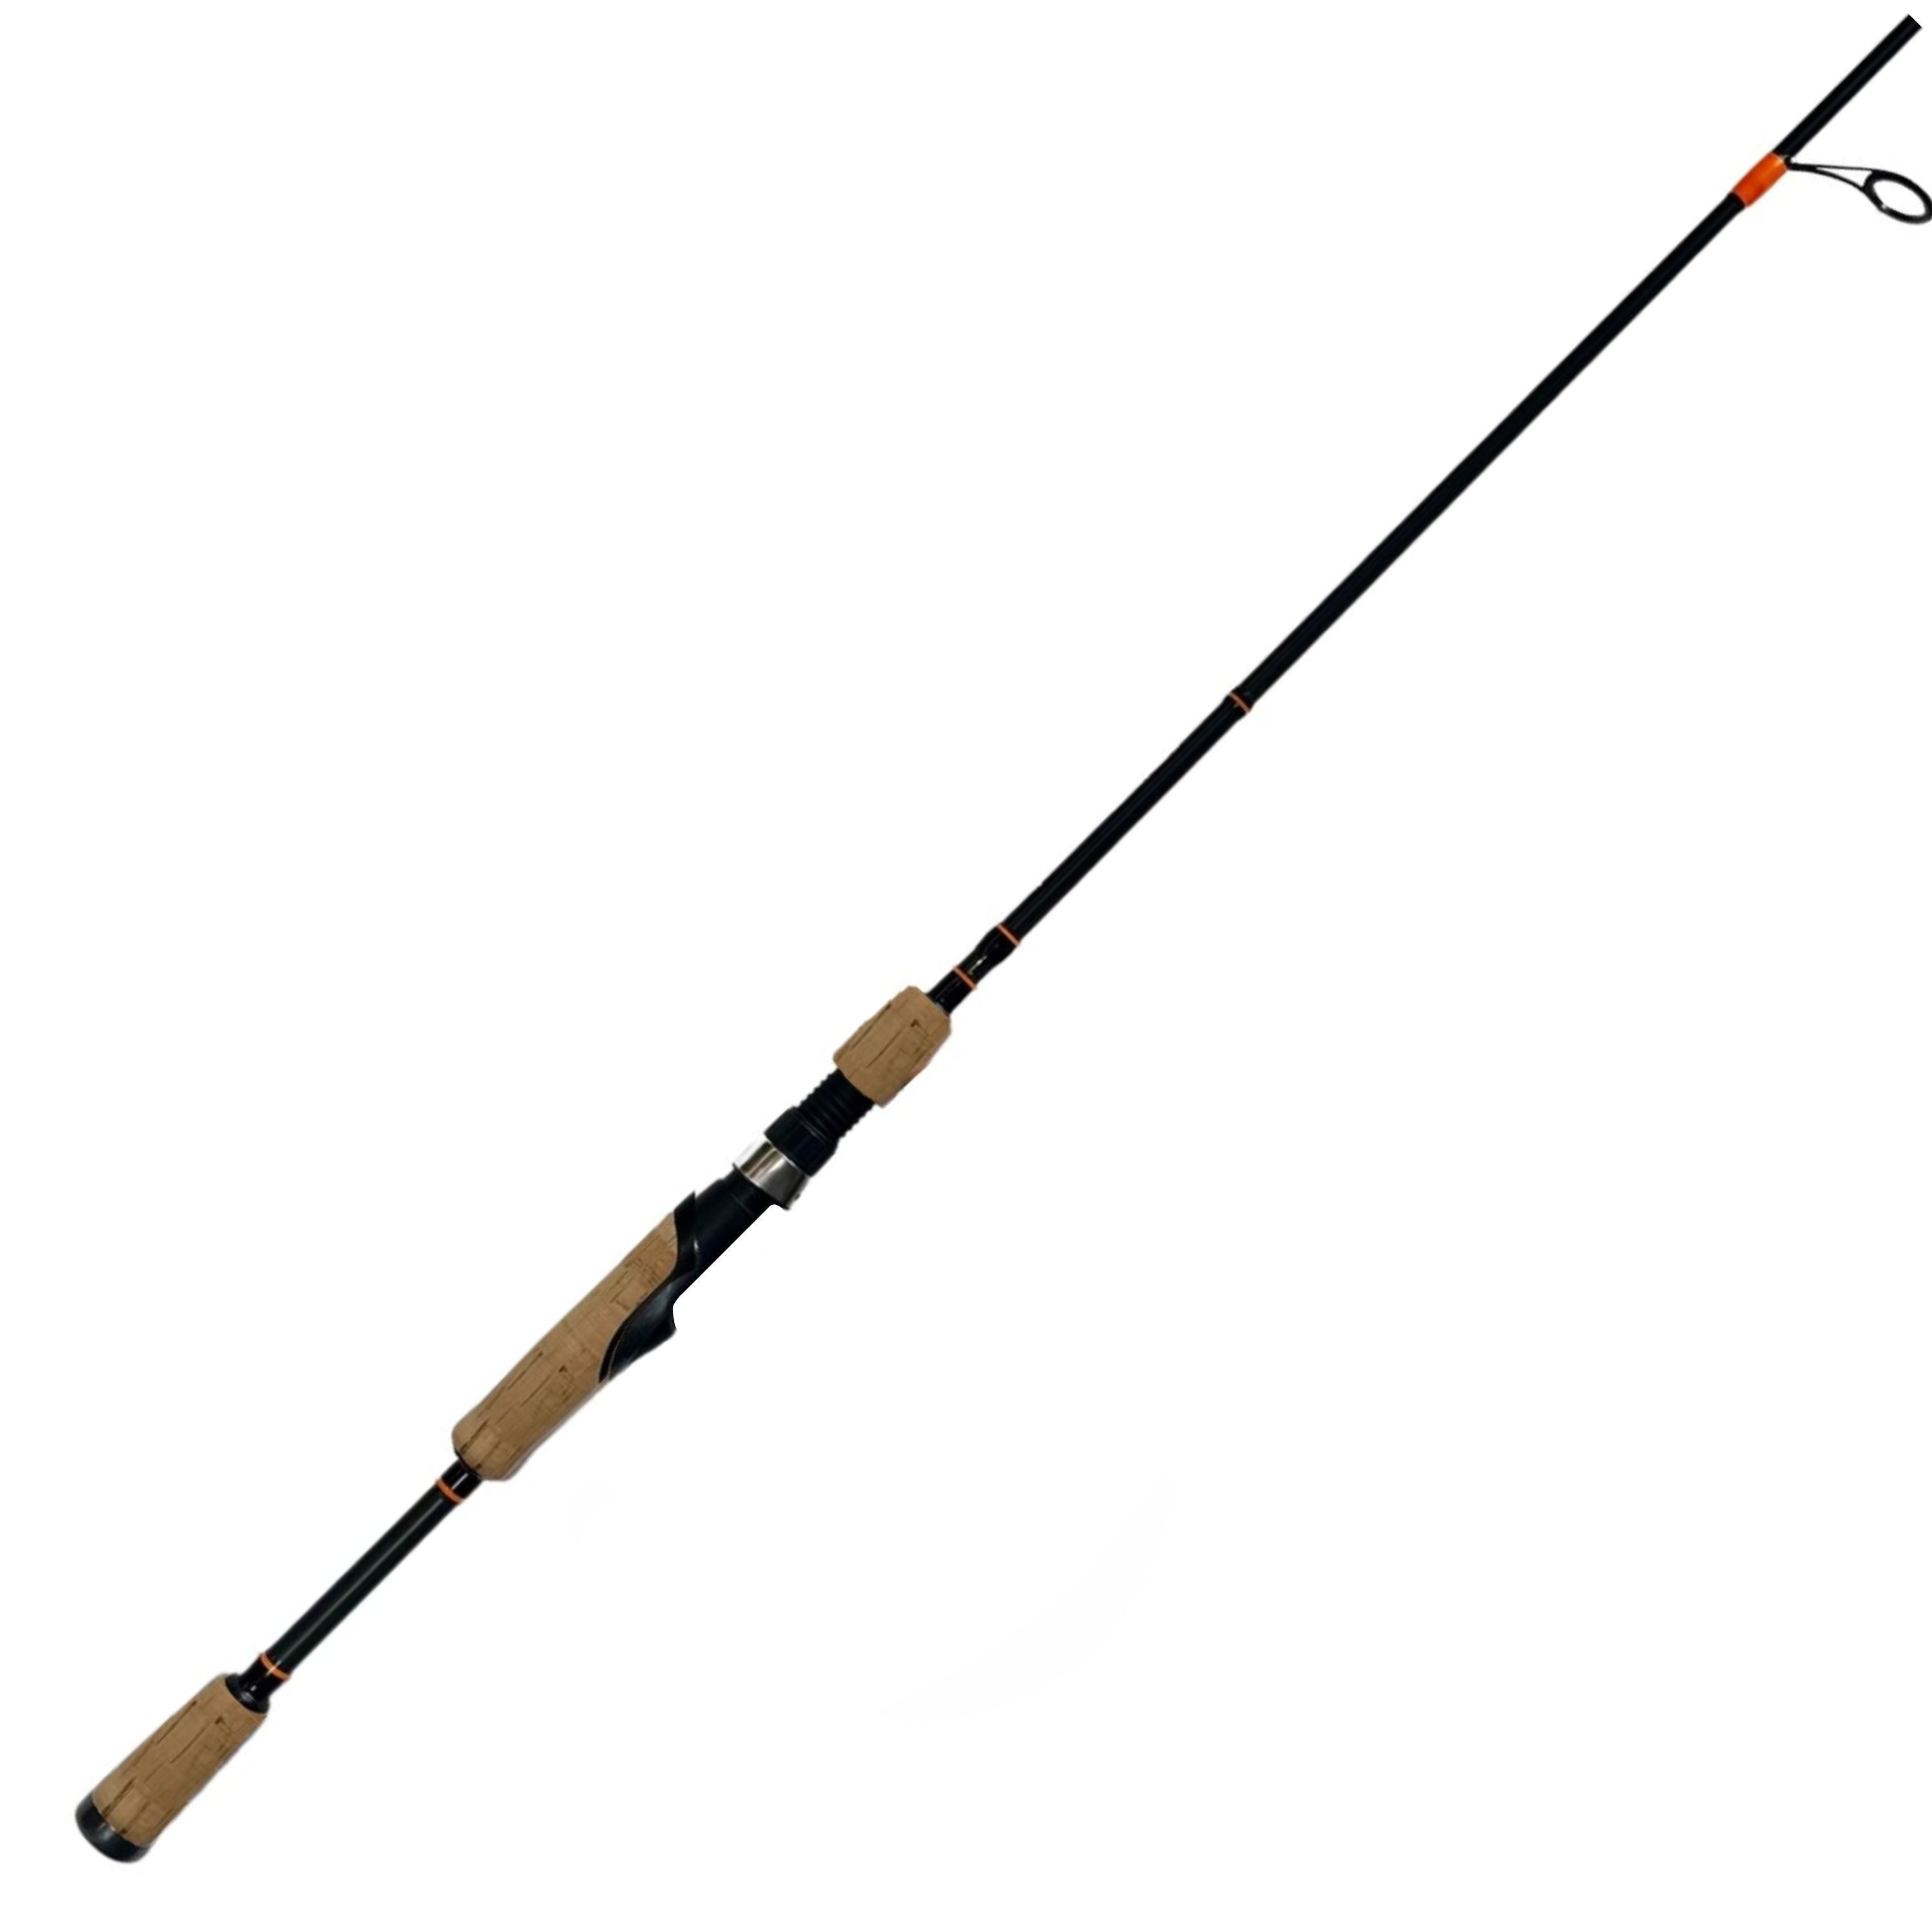 "Outback R" Spinning rod